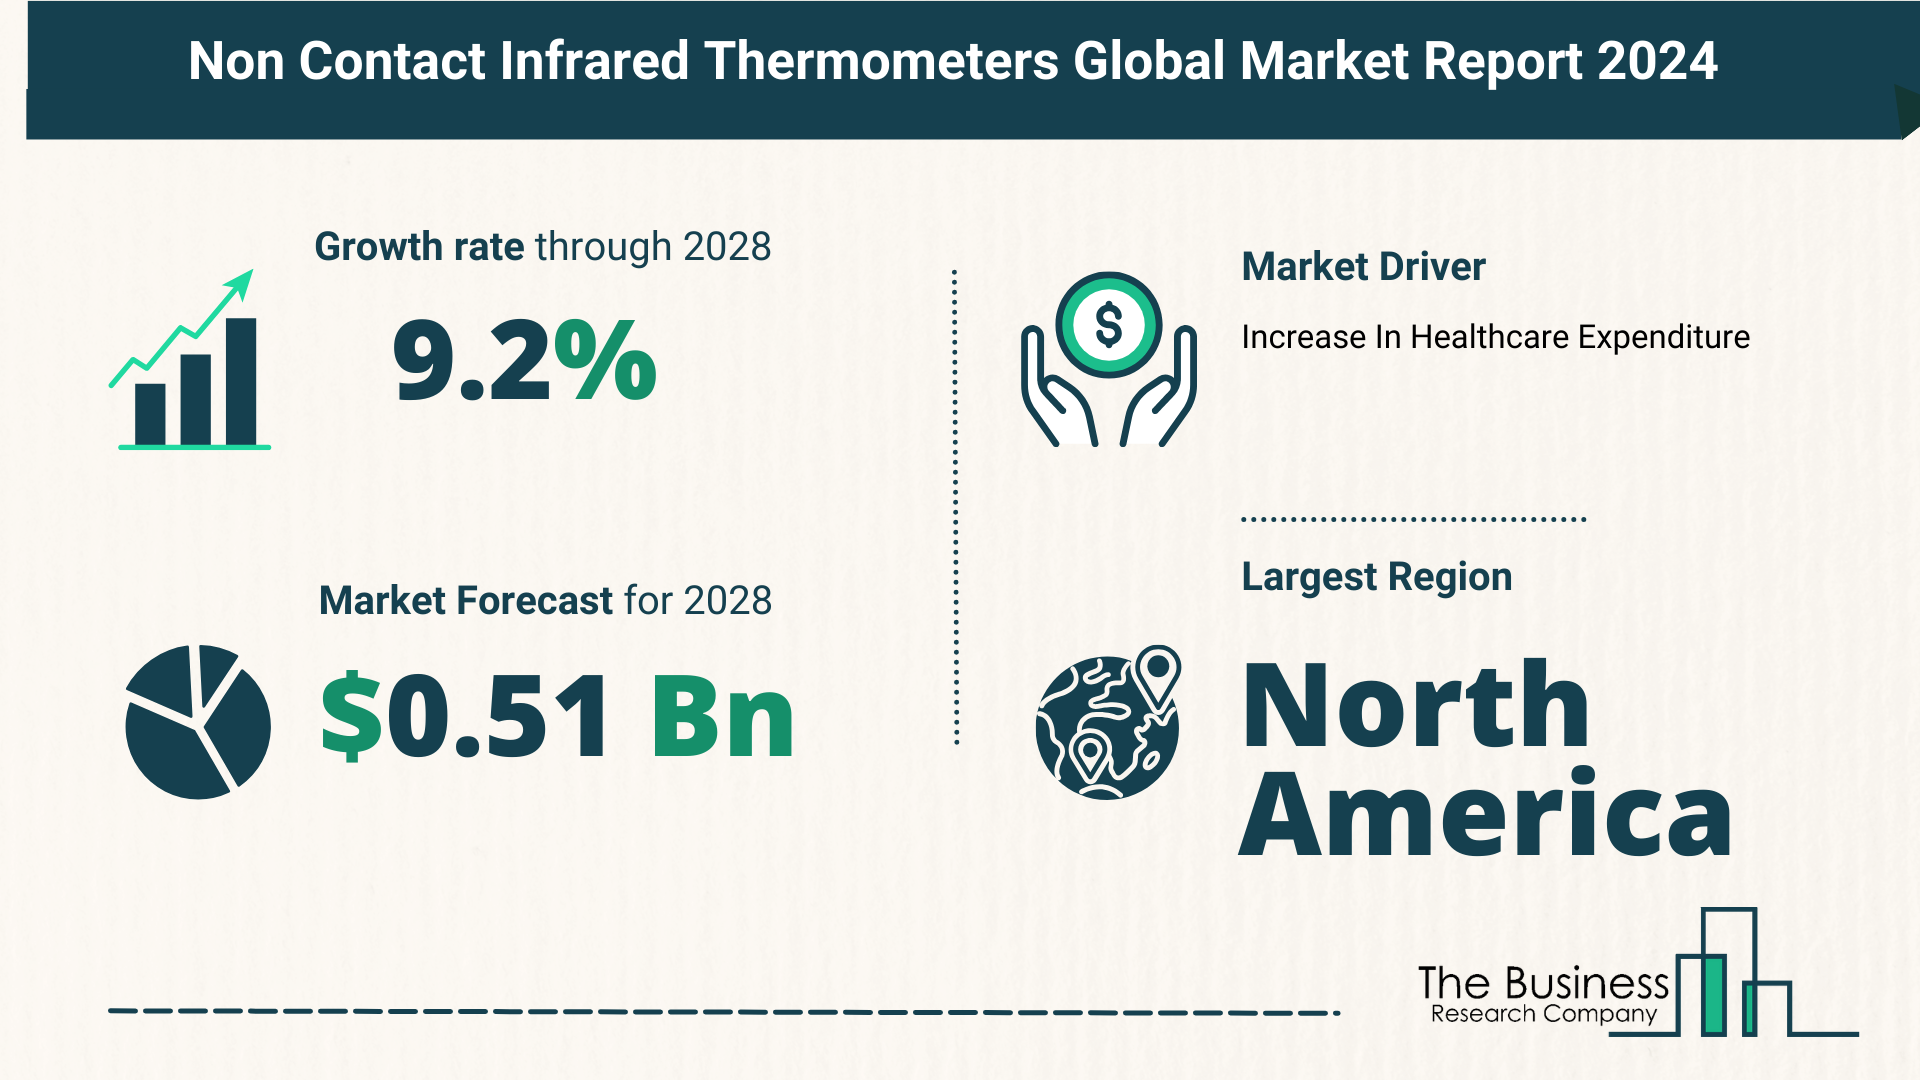 Top 5 Insights From The Non Contact Infrared Thermometers Market Report 2024